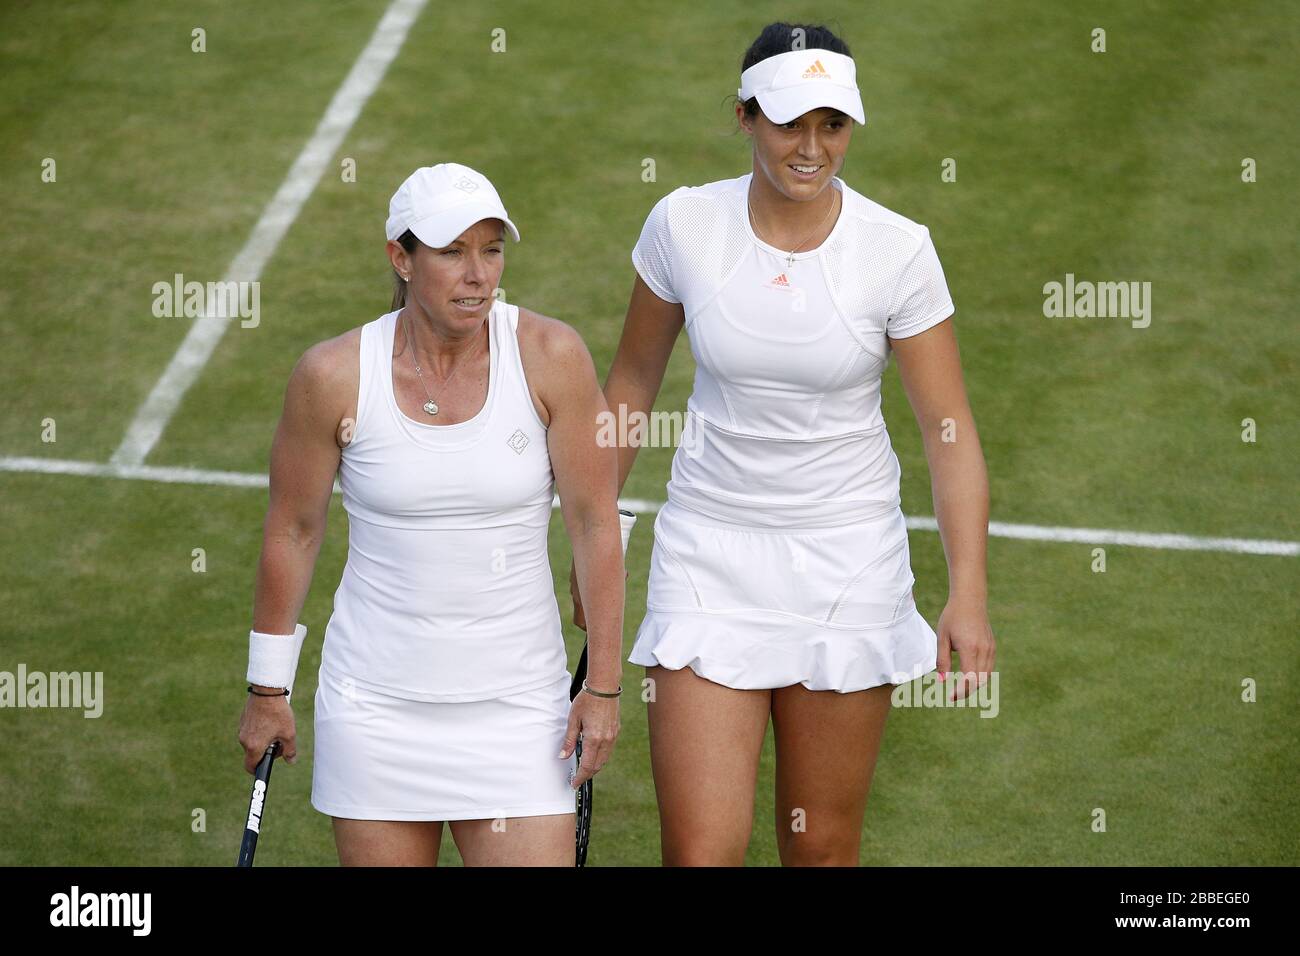 Great Britain's Laura Robson (right) and USA's Lisa Raymond in their women's doubles match against Germany's Anna-Lena Groenefeld and Czech Republic's Kveta Peschke during day six of the Wimbledon Championships at The All England Lawn Tennis and Croquet Club, Wimbledon. Stock Photo